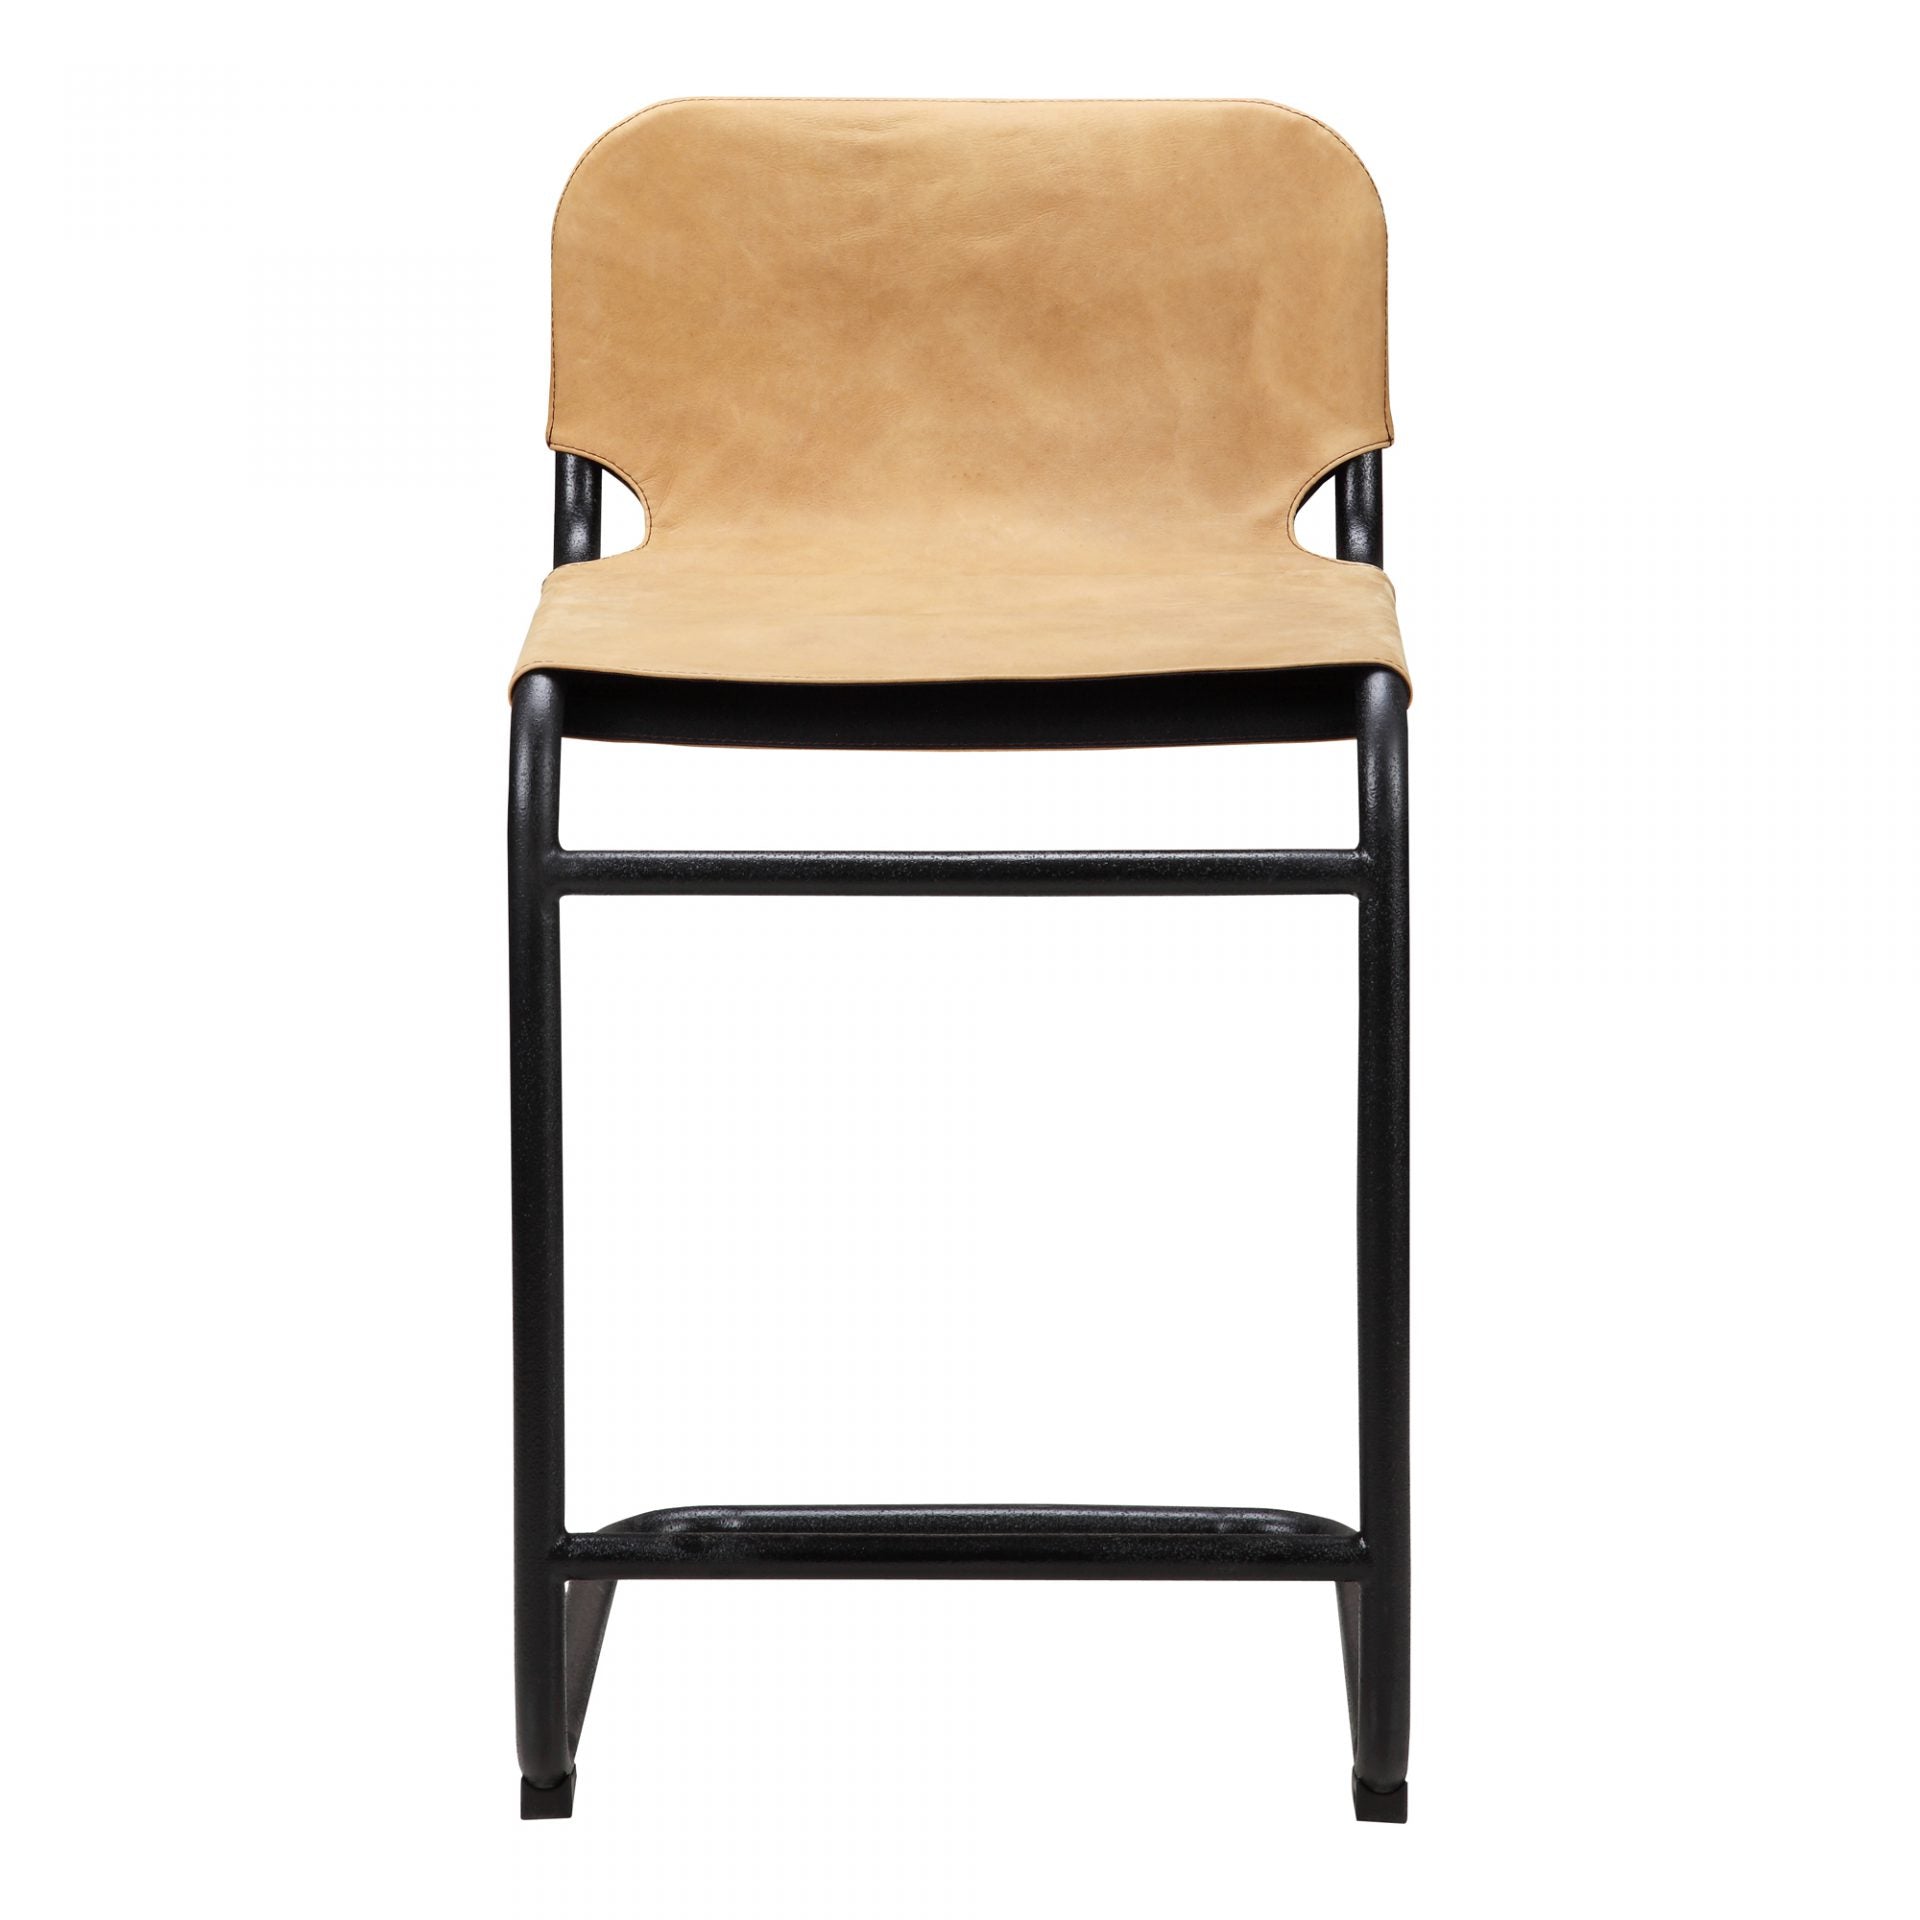 This Baker Counter Stool - Sunbaked Tan Leather has an ultra-supple tan leather seat, supported by a thick black iron frame. Sure to complete the look for any kitchen, island, or other area!   Size: 19"W x 21"D x 35"H